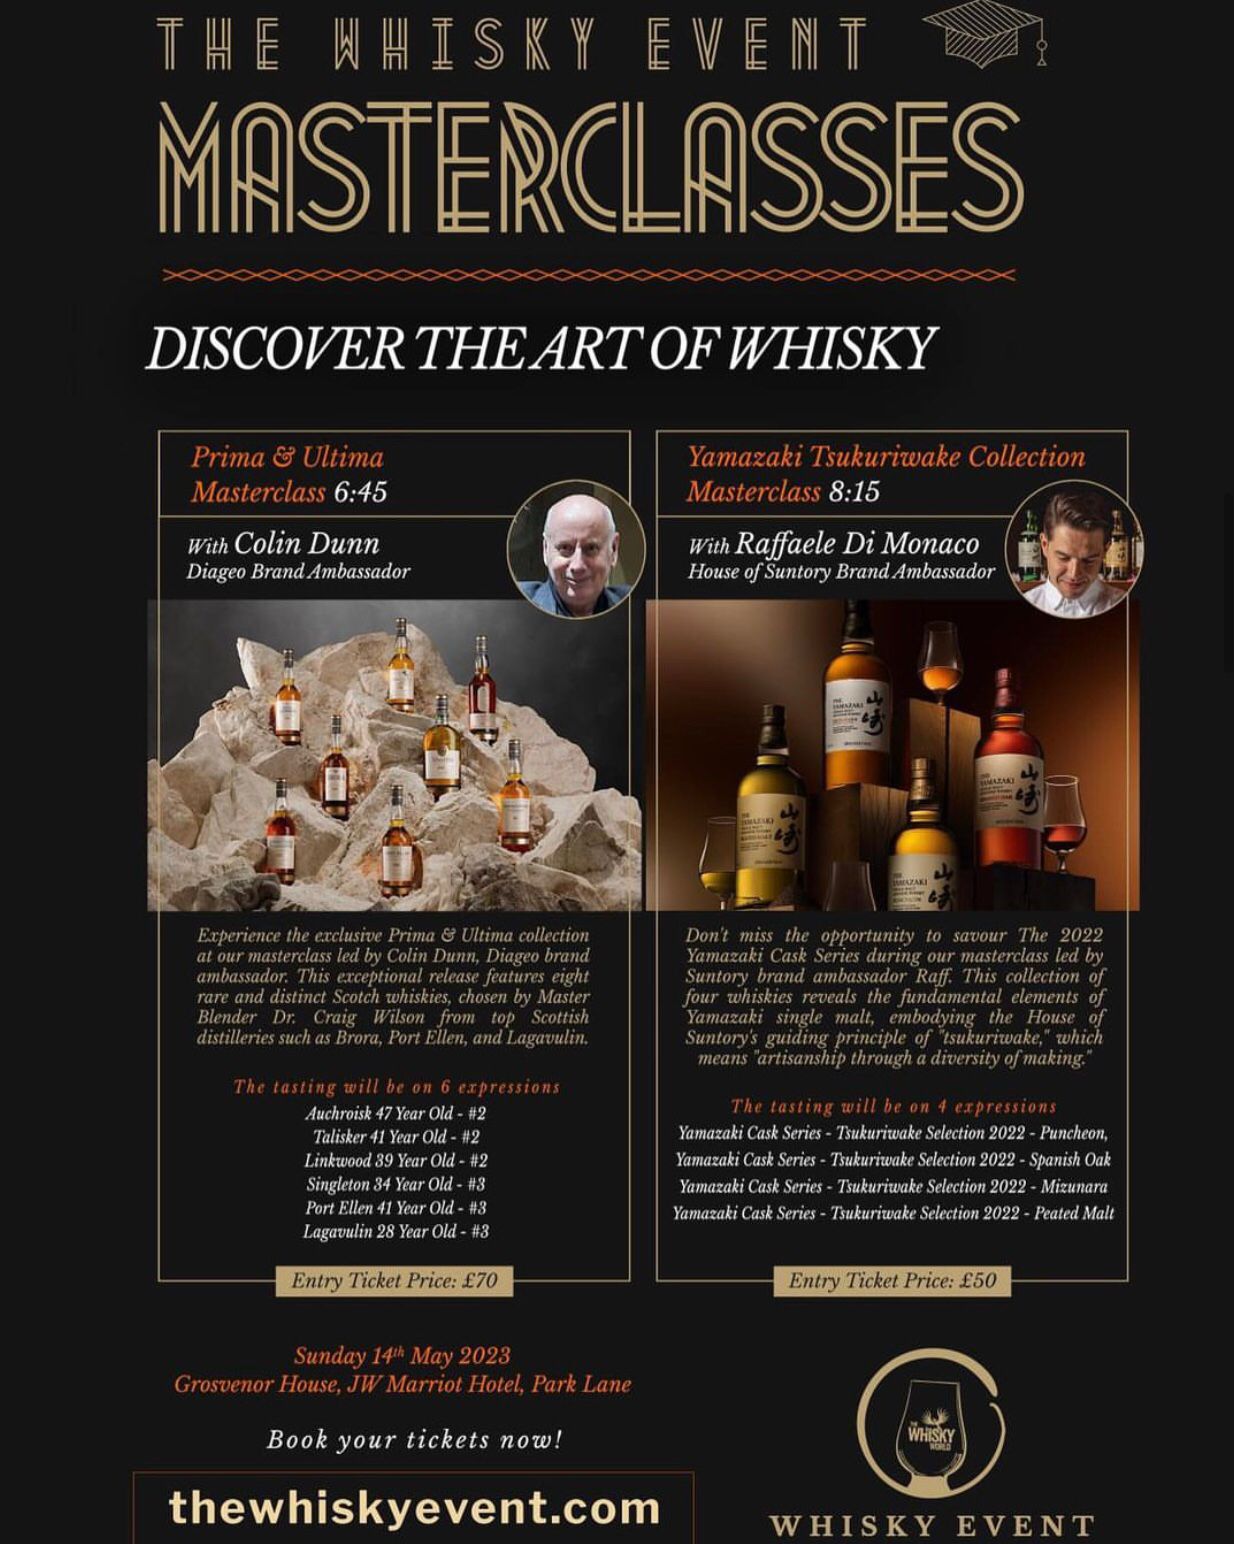 A spirited evening The Whisky Event comes to Park Lane Jewish News